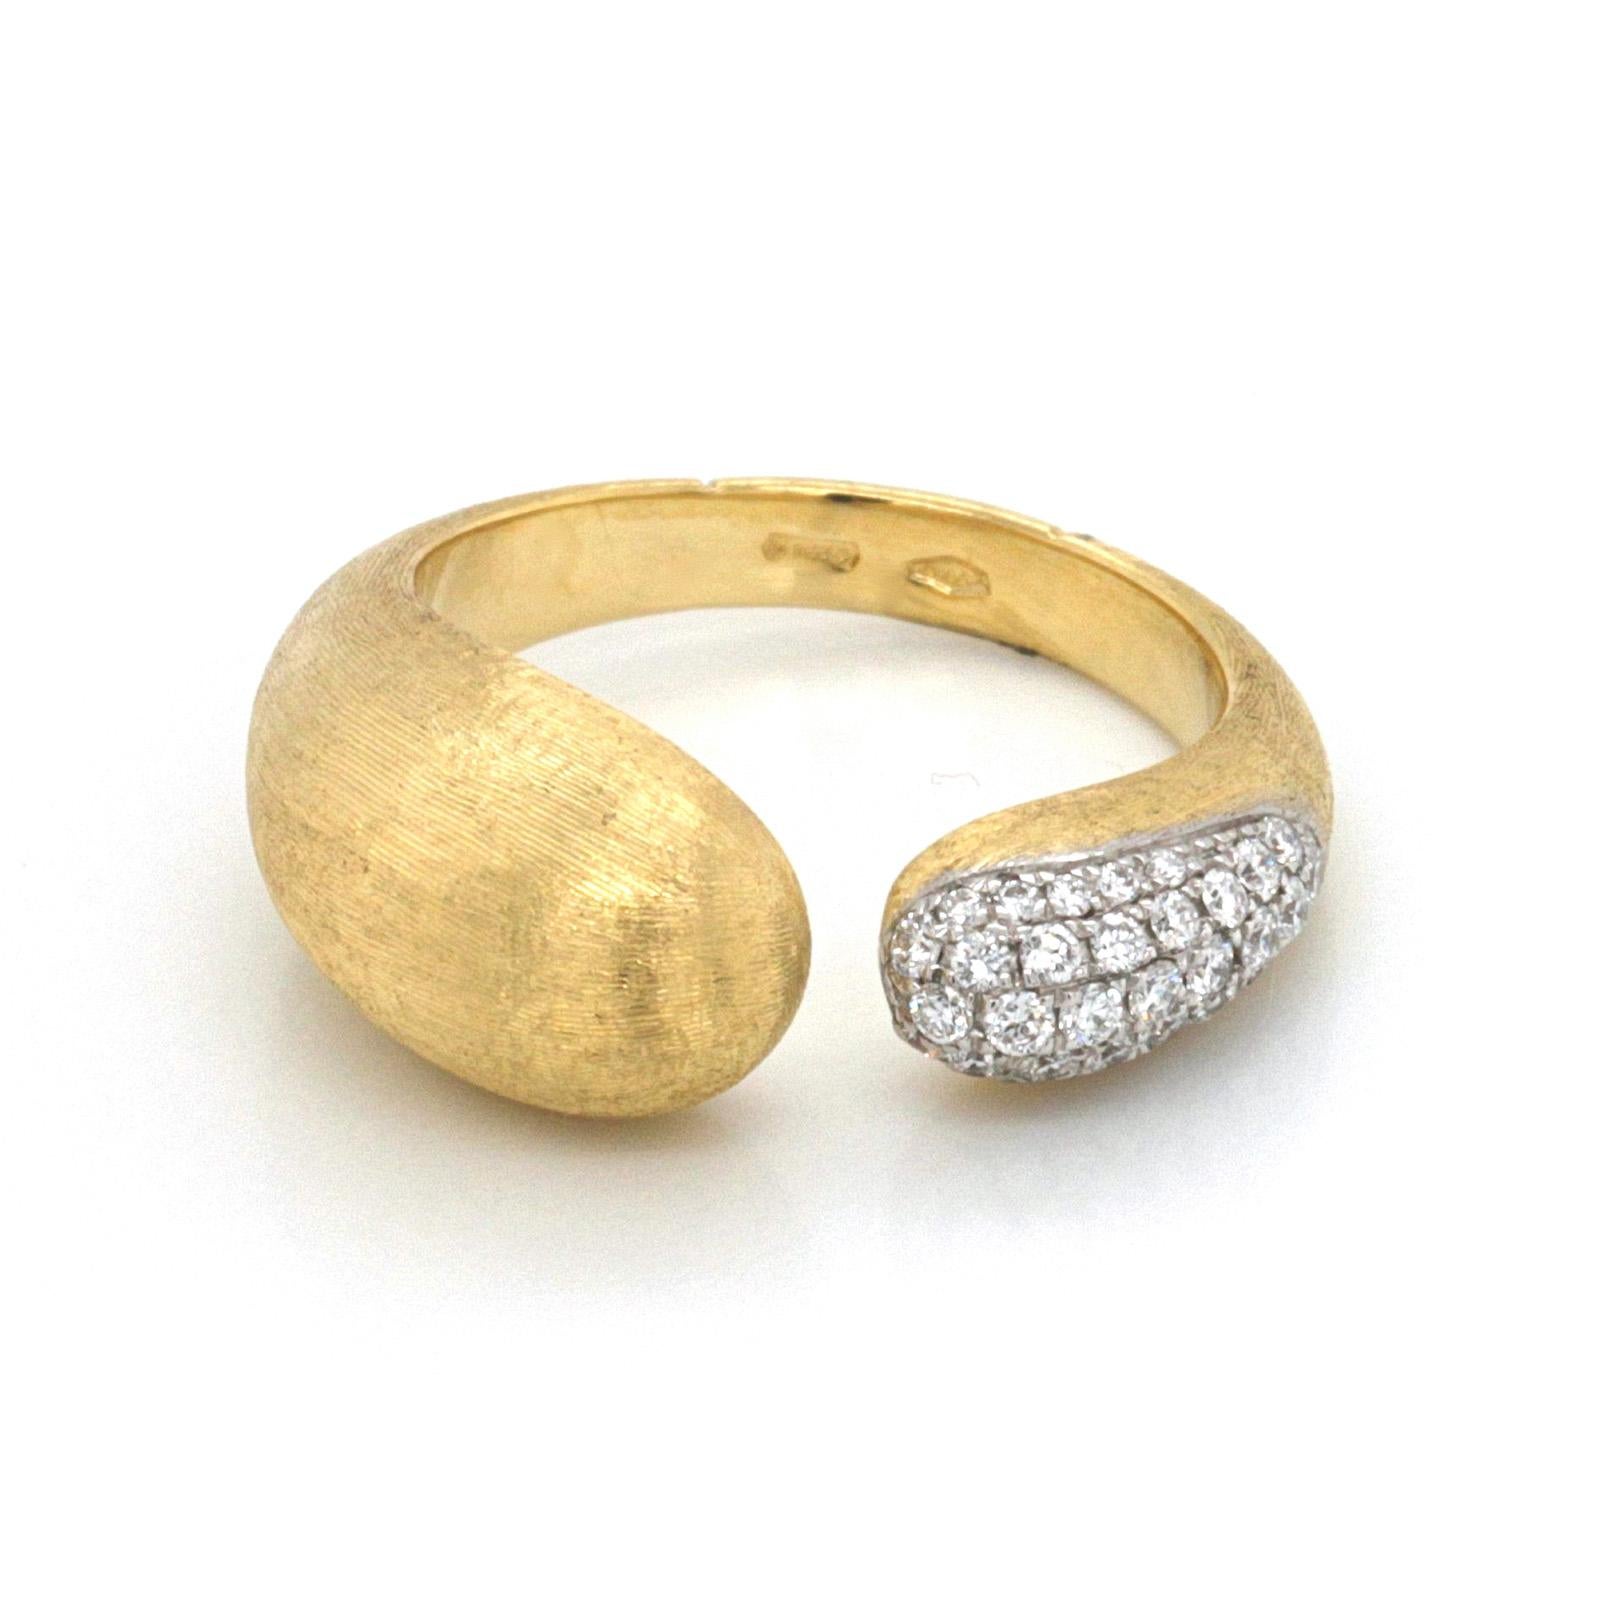 100% Authentic, 100% Customer Satisfaction

Top: 8.8 mm

Band Width: 3.7 mm

Metal: 18K Yellow Gold

Size: 7

Hallmarks: Marco Bicego 18K

Total Weight: 6.1 Grams

Stone: 0.35 CT Diamonds 

Condition: Used Like New

Estimated Retail Price: